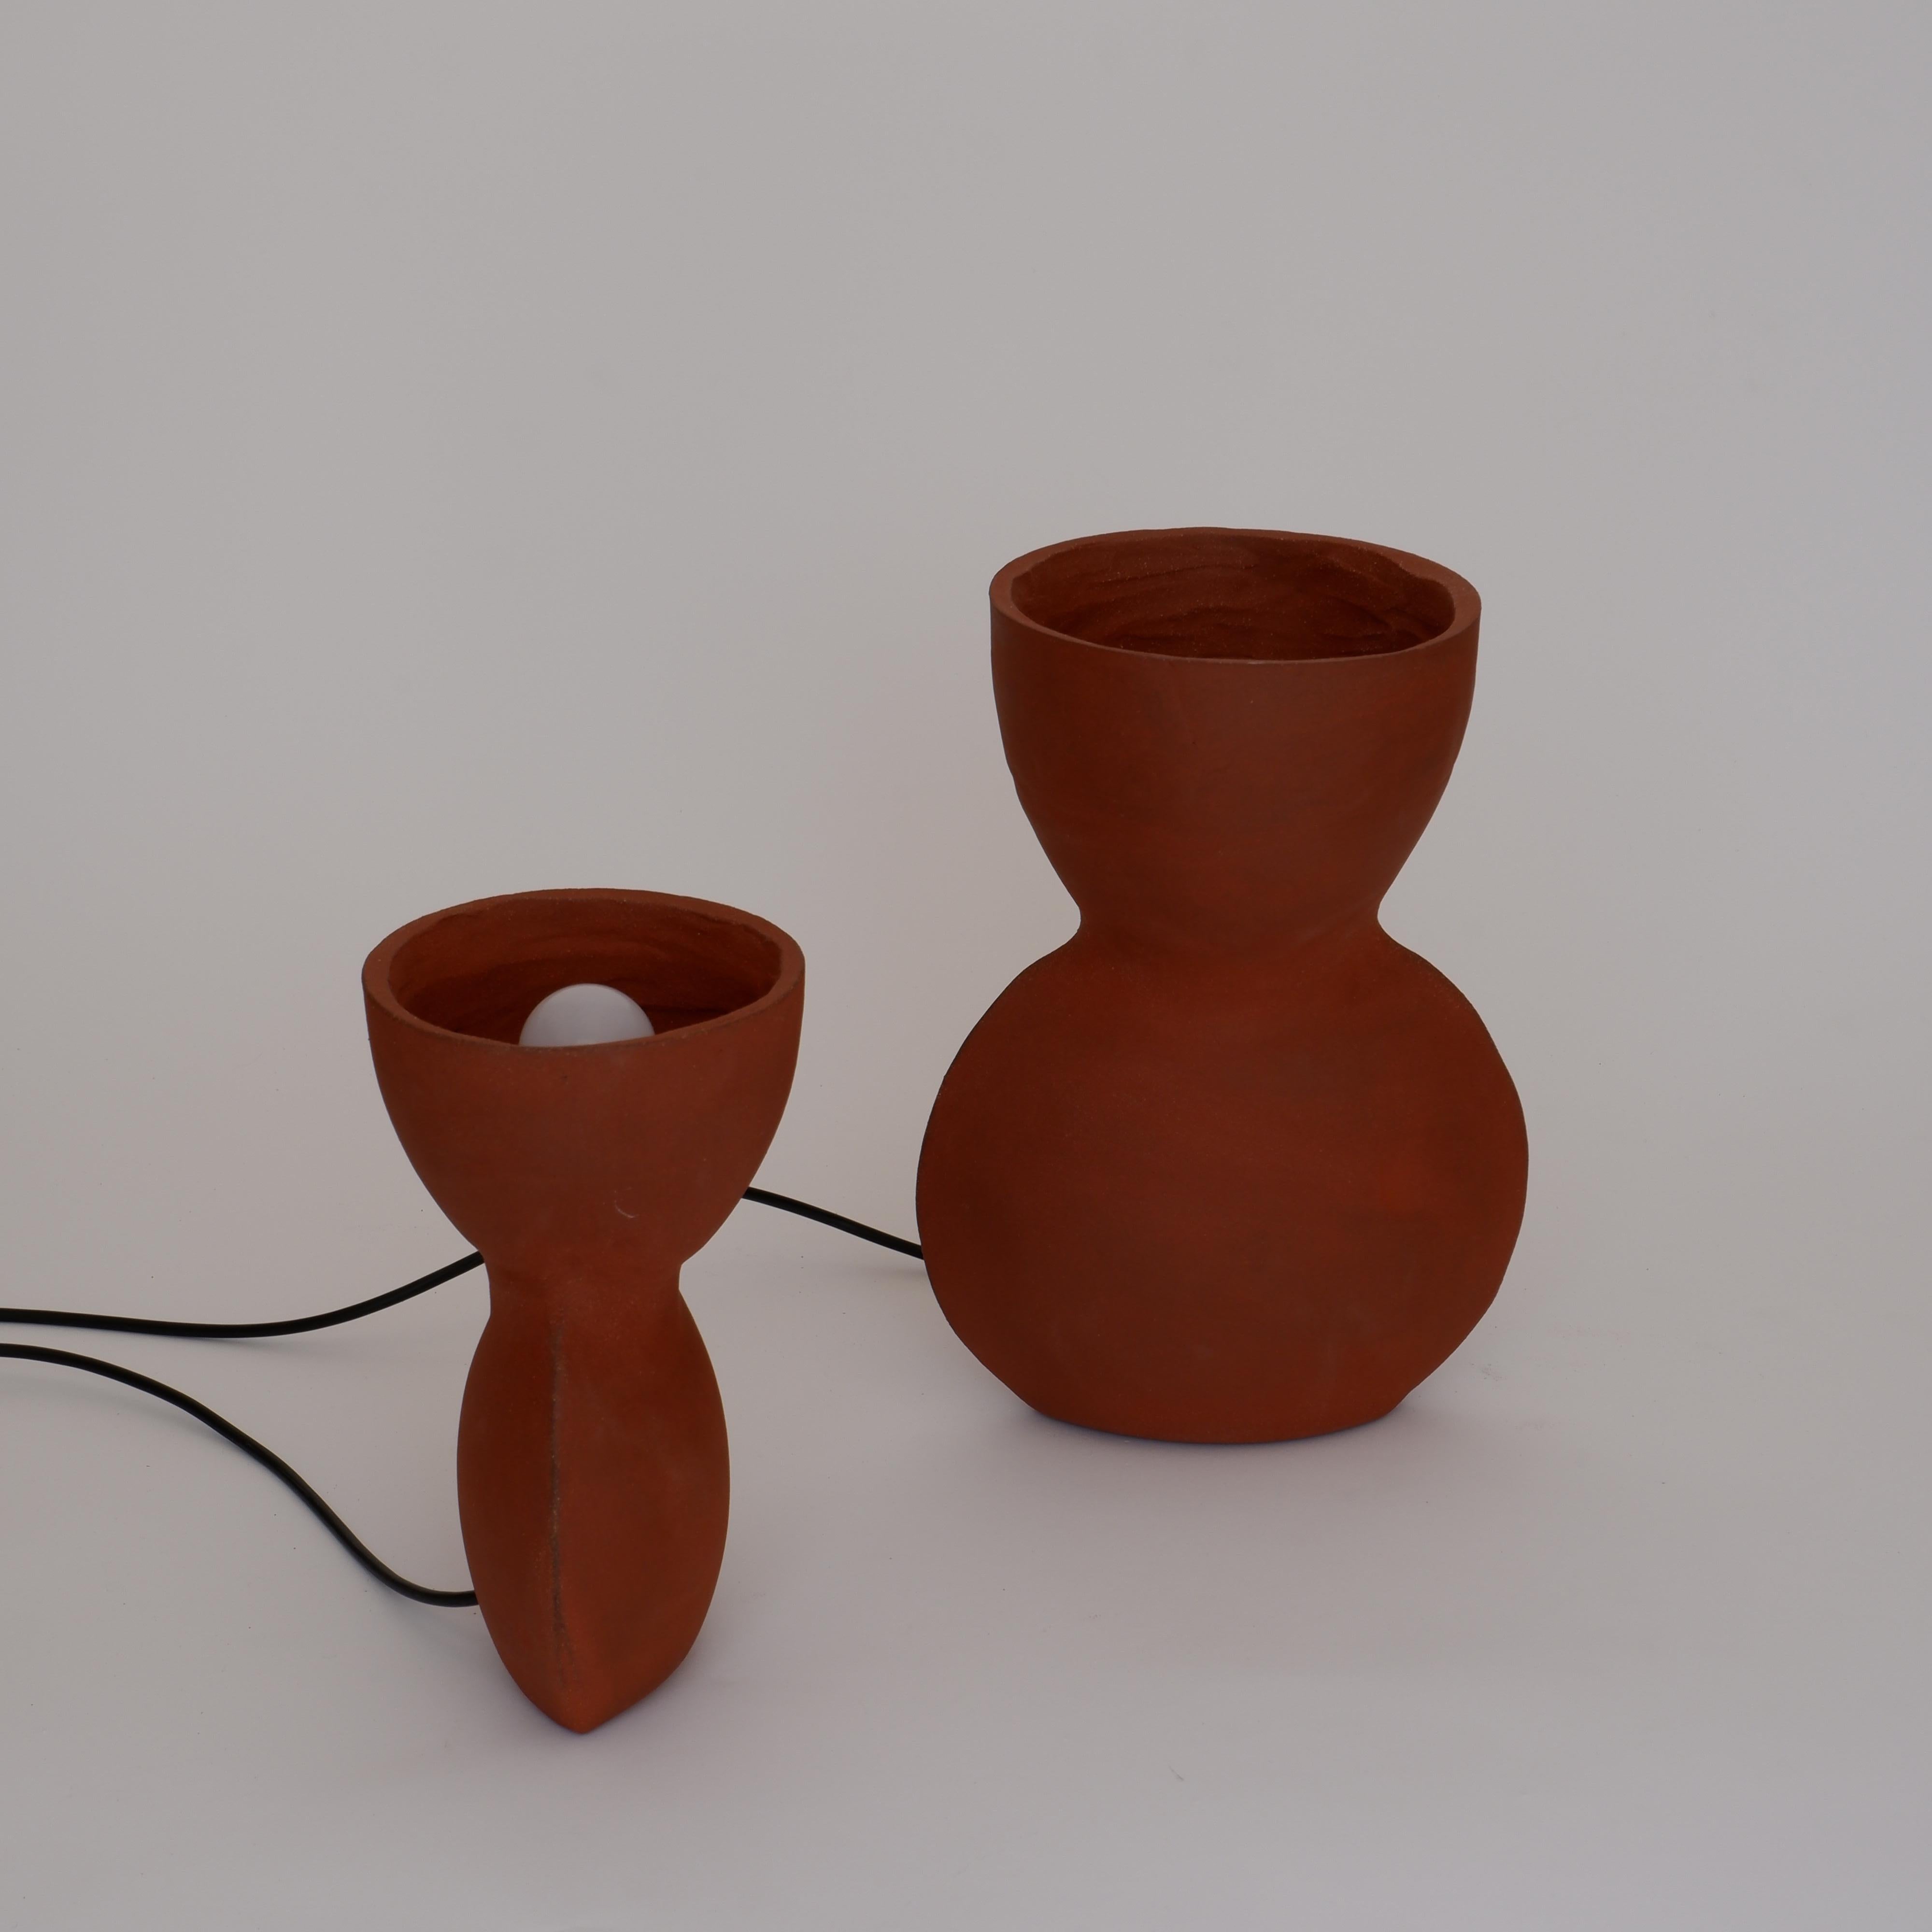 Set Of 2 Unira Red Lamps by Ia Kutateladze
One Of A Kind.
Dimensions: Small: D 14 x W 18 x H 25 cm.
Big: D 17 x W 23 x H 32 cm. 
Materials: Clay.

Each piece is one of a kind, due to its free hand-building process. Different color variations